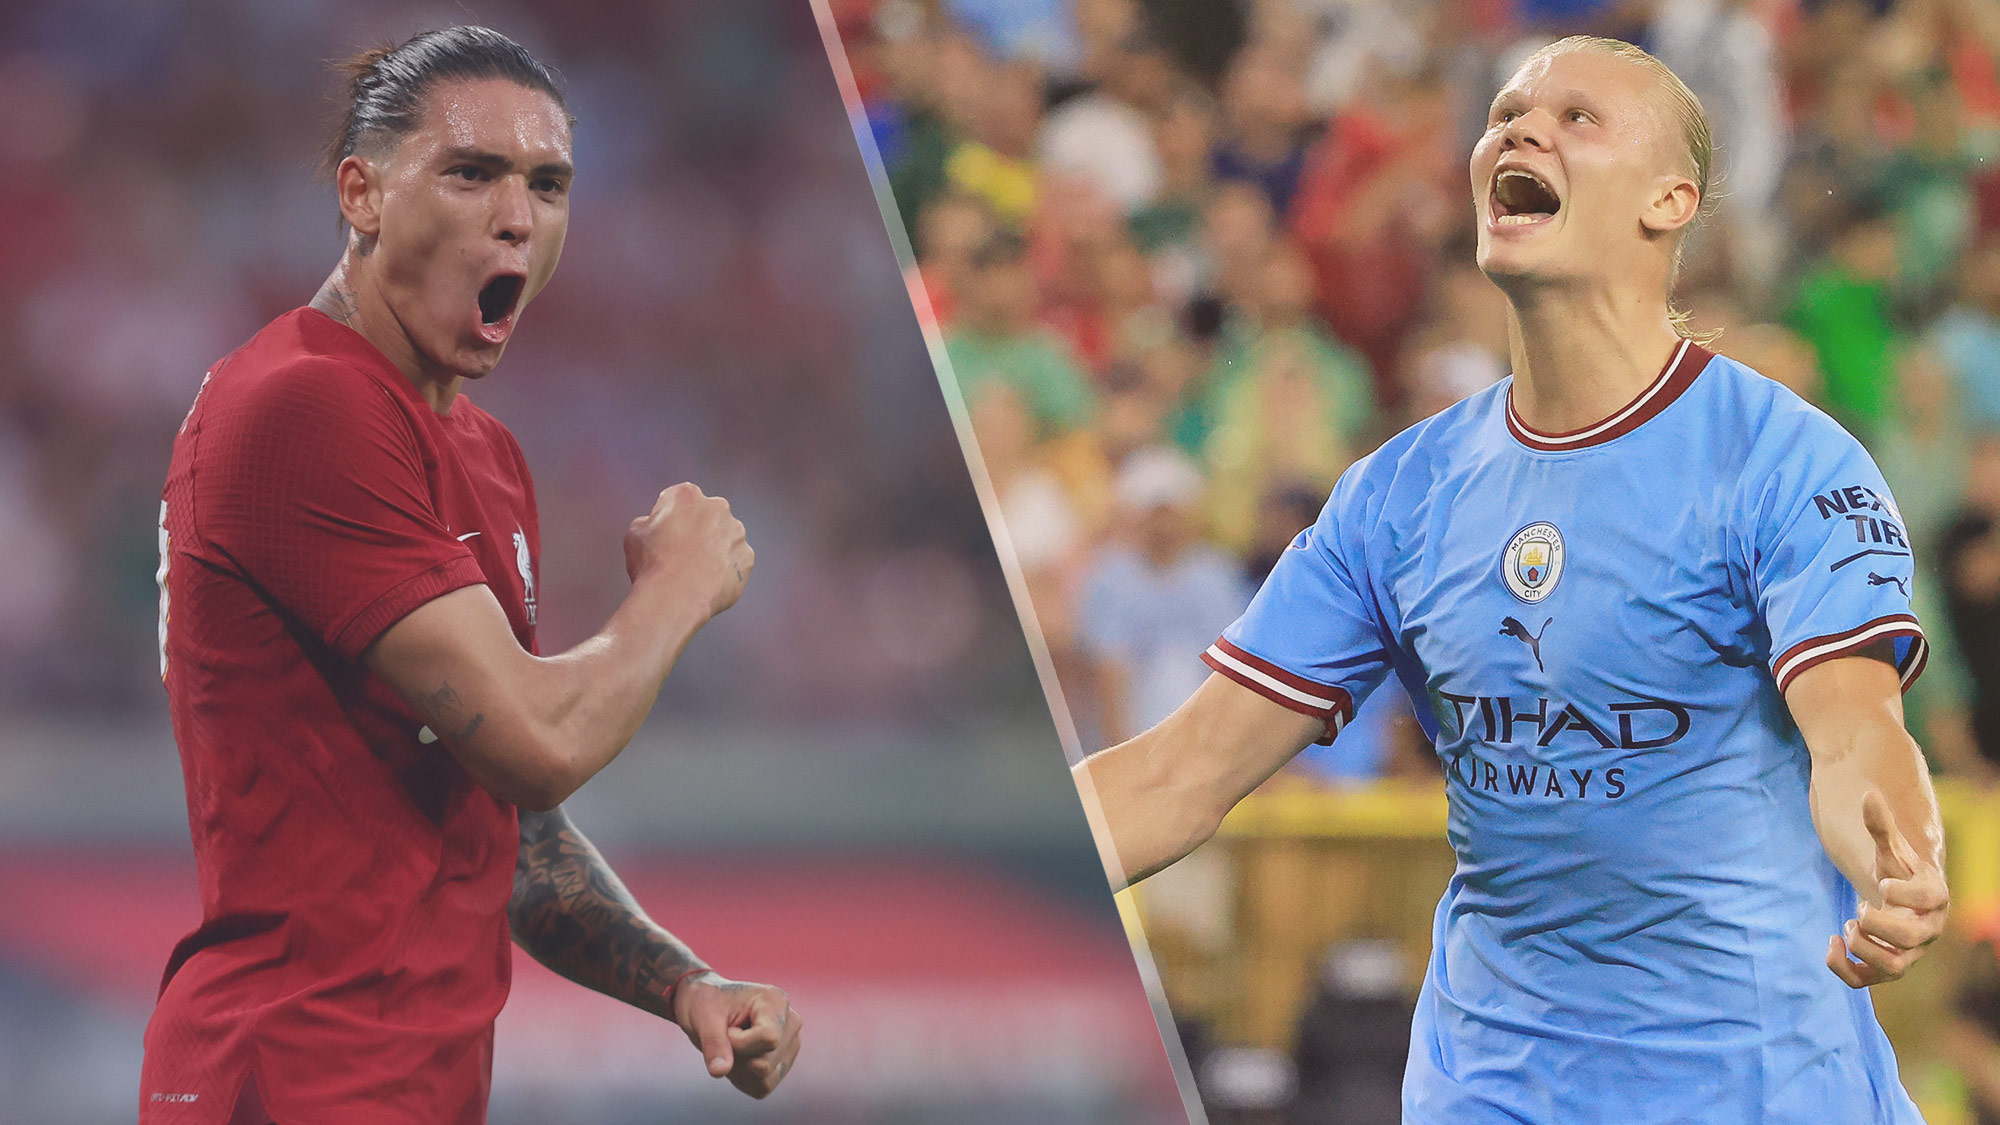 Liverpool vs Man City live stream — how to watch Community Shield free online Toms Guide